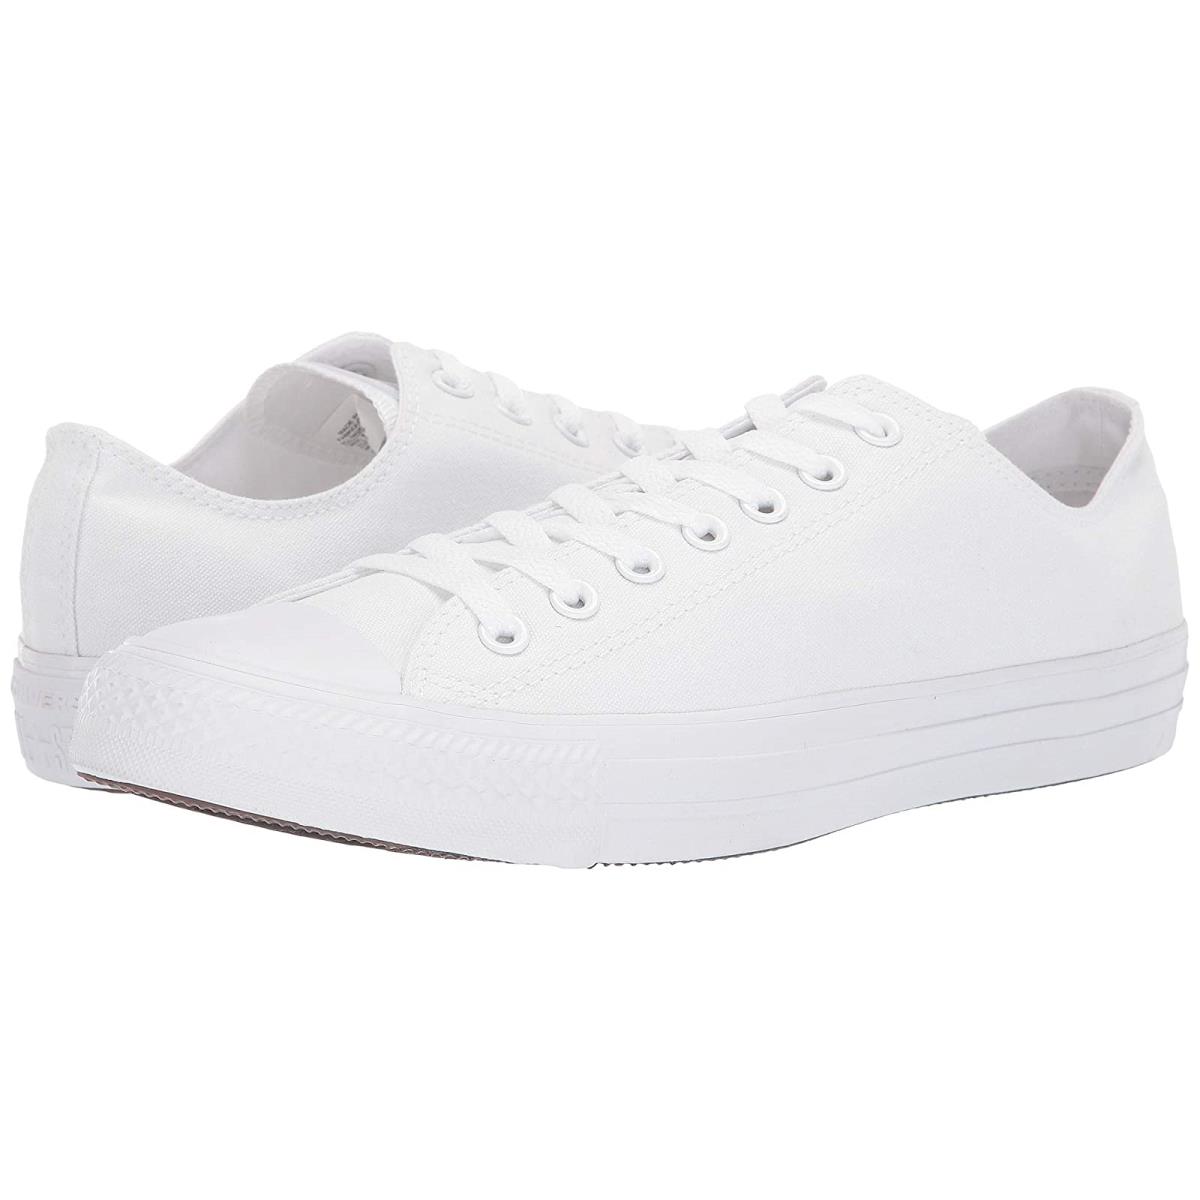 Unisex Shoes Converse Chuck Taylor All Star Core Ox White Monochrom